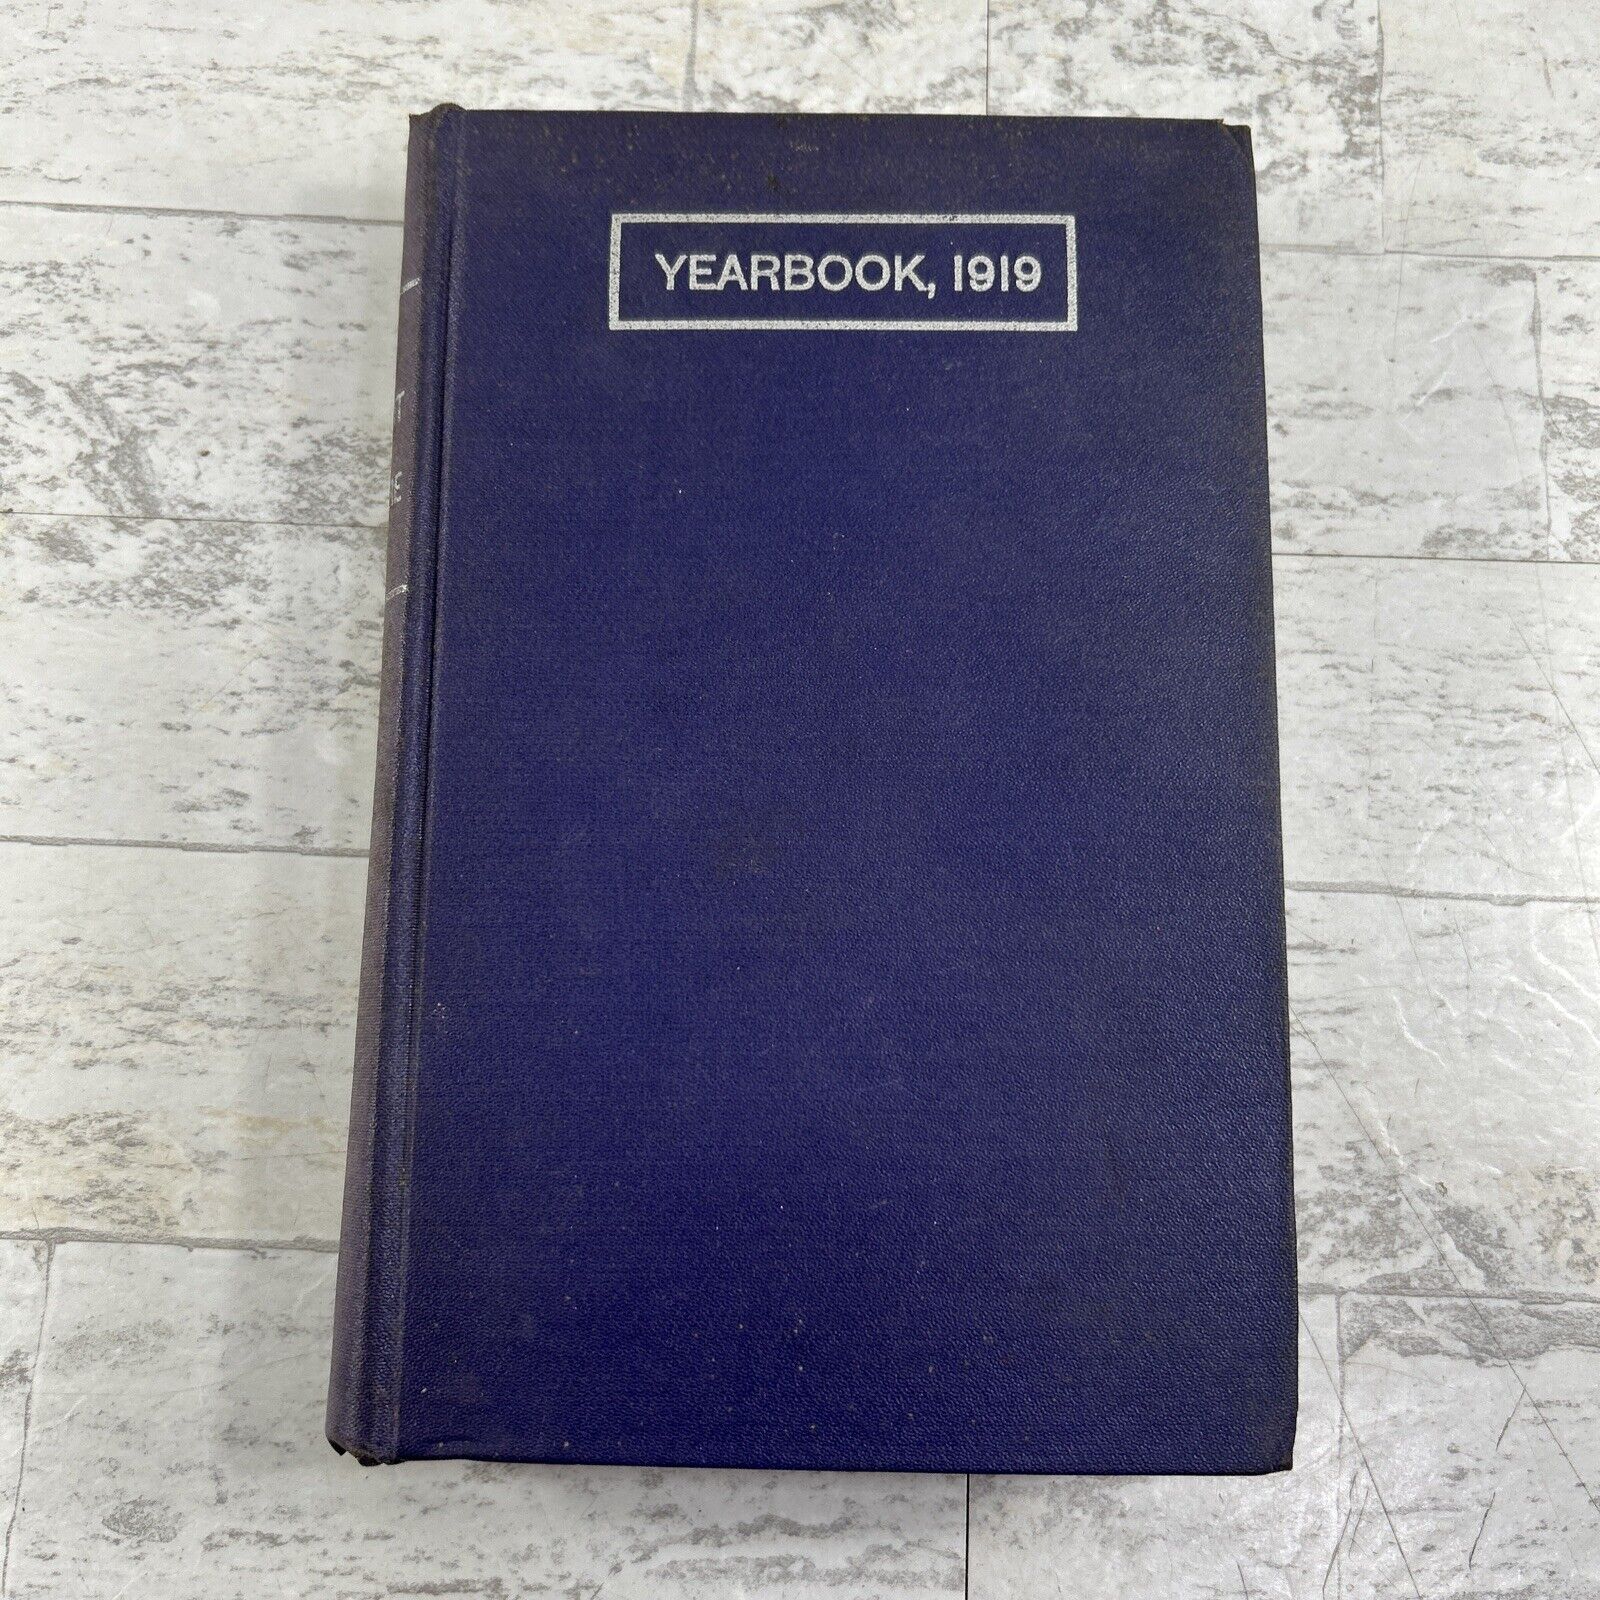 Yearbook Of 1919 by the US Department of Agriculture, marketing purchasing